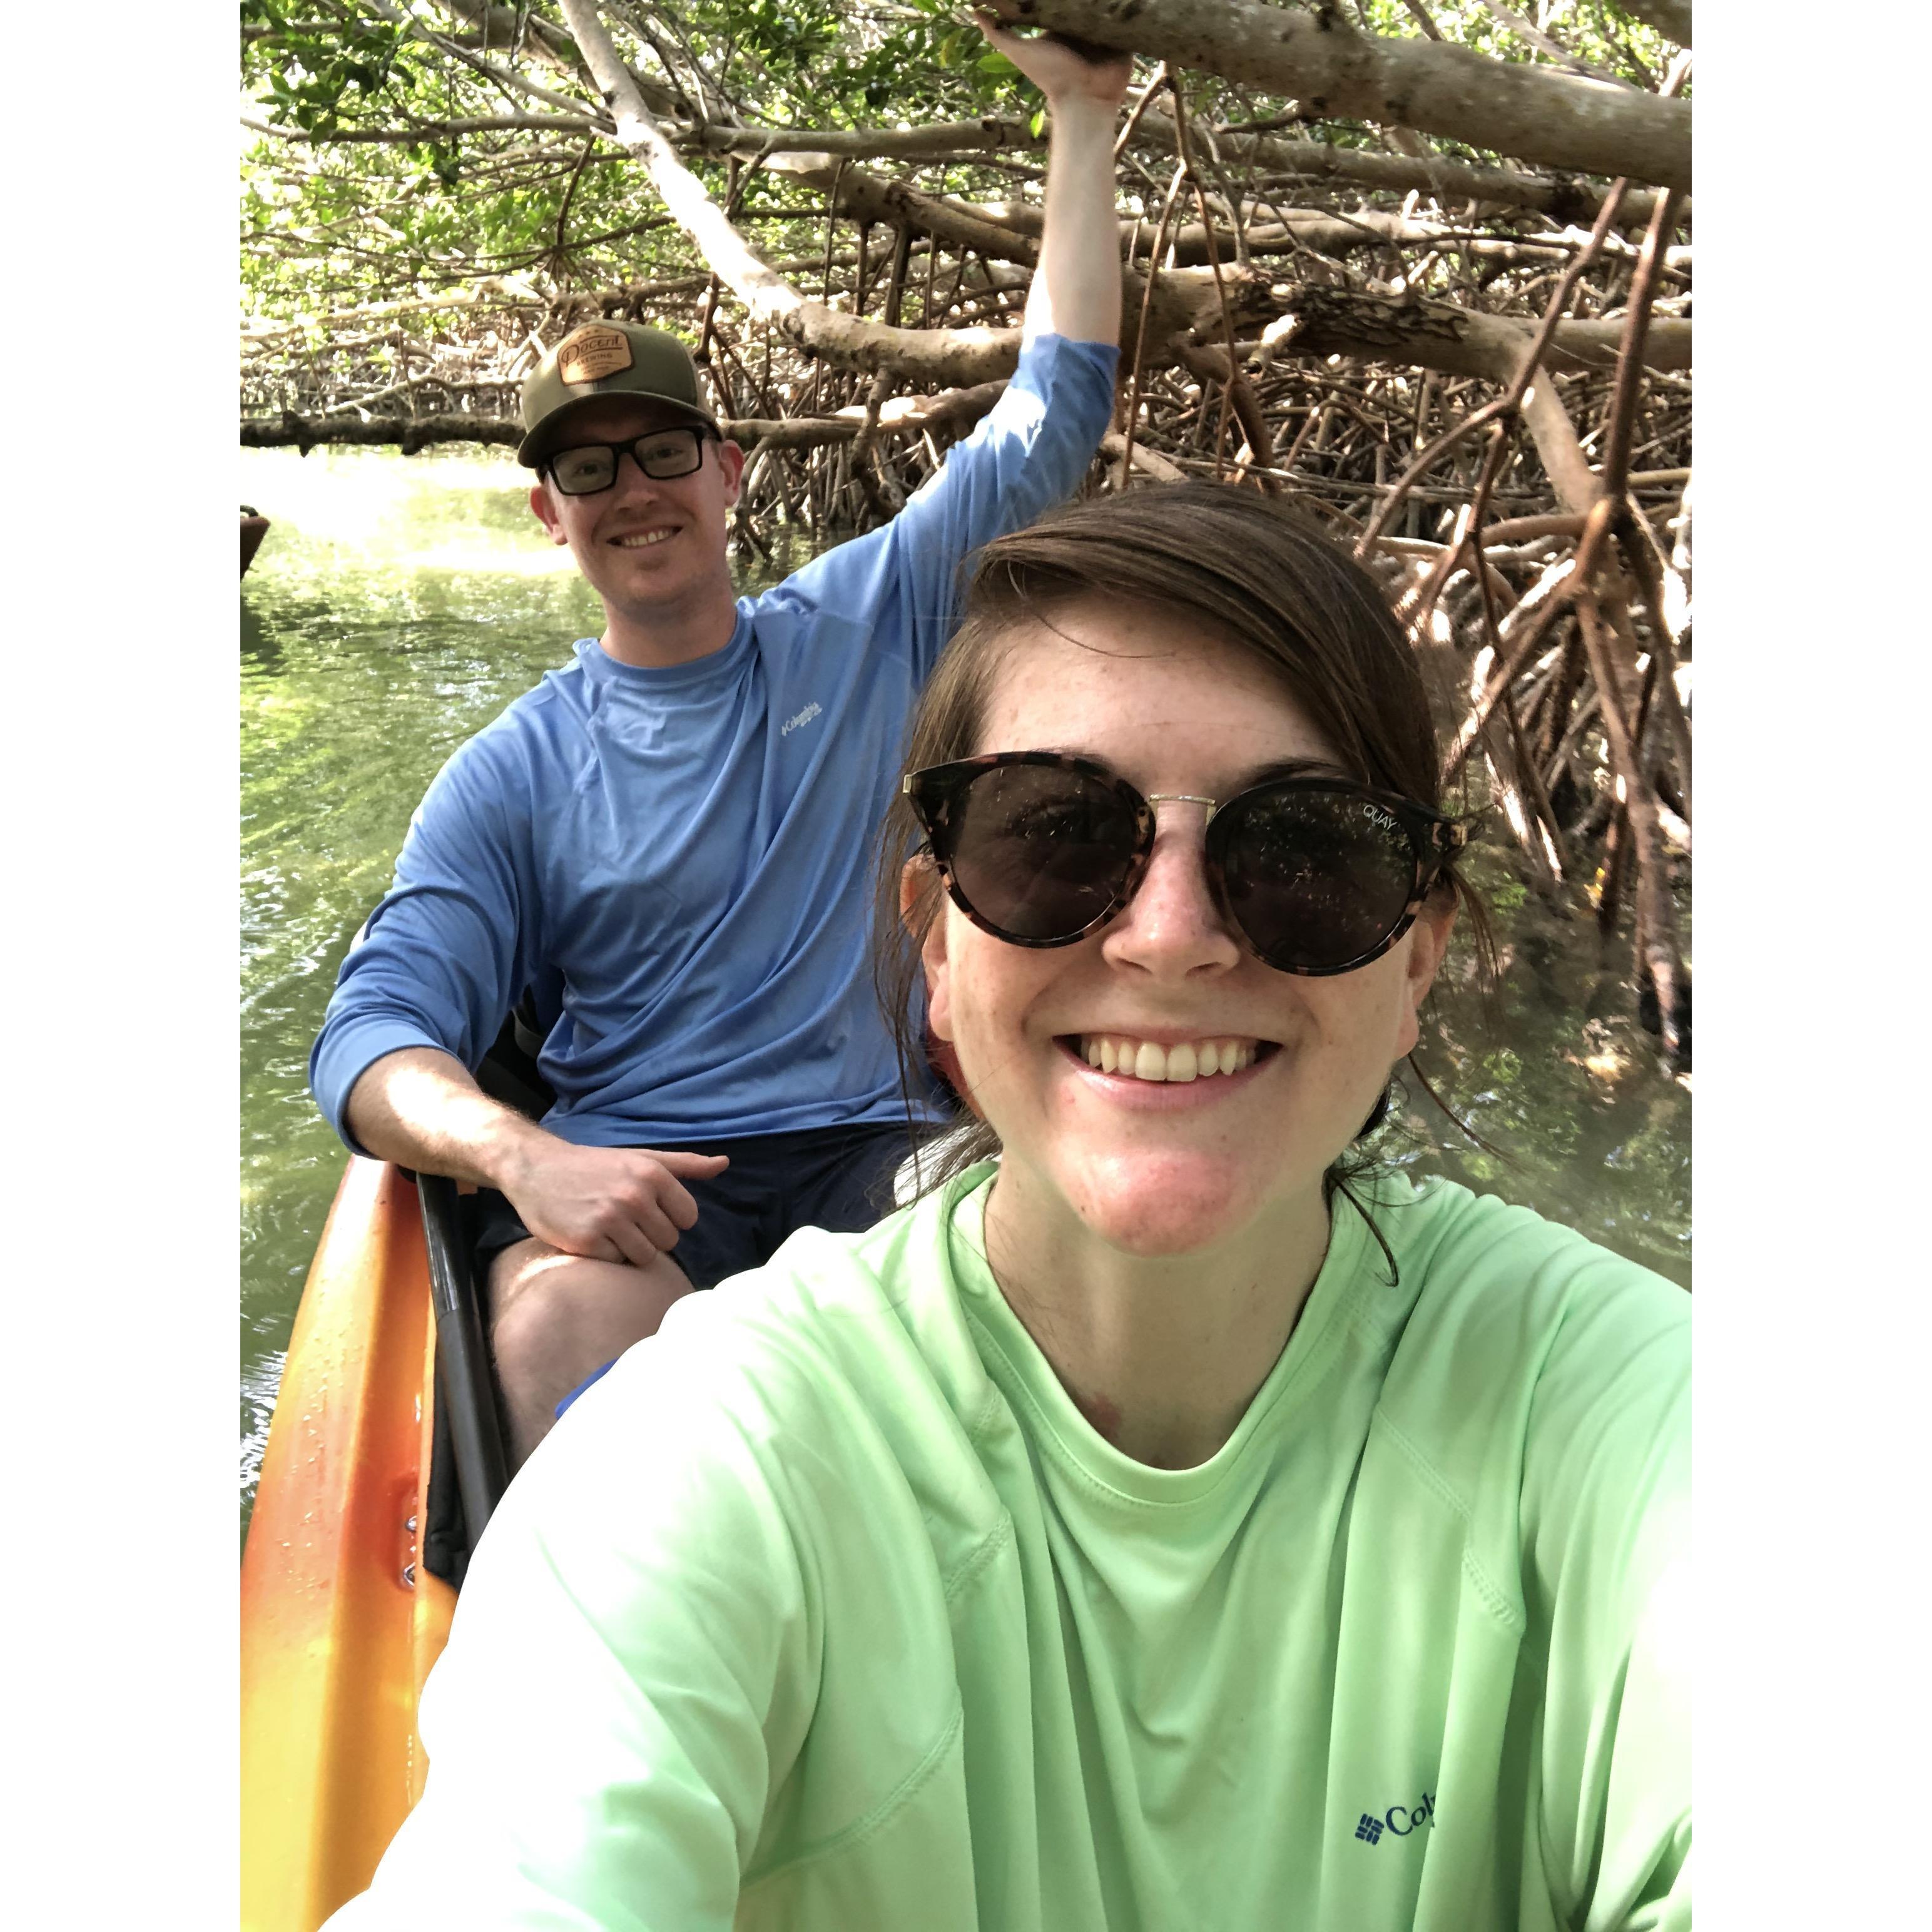 Kayaking through the mangroves in Key West with Wesley's Family!